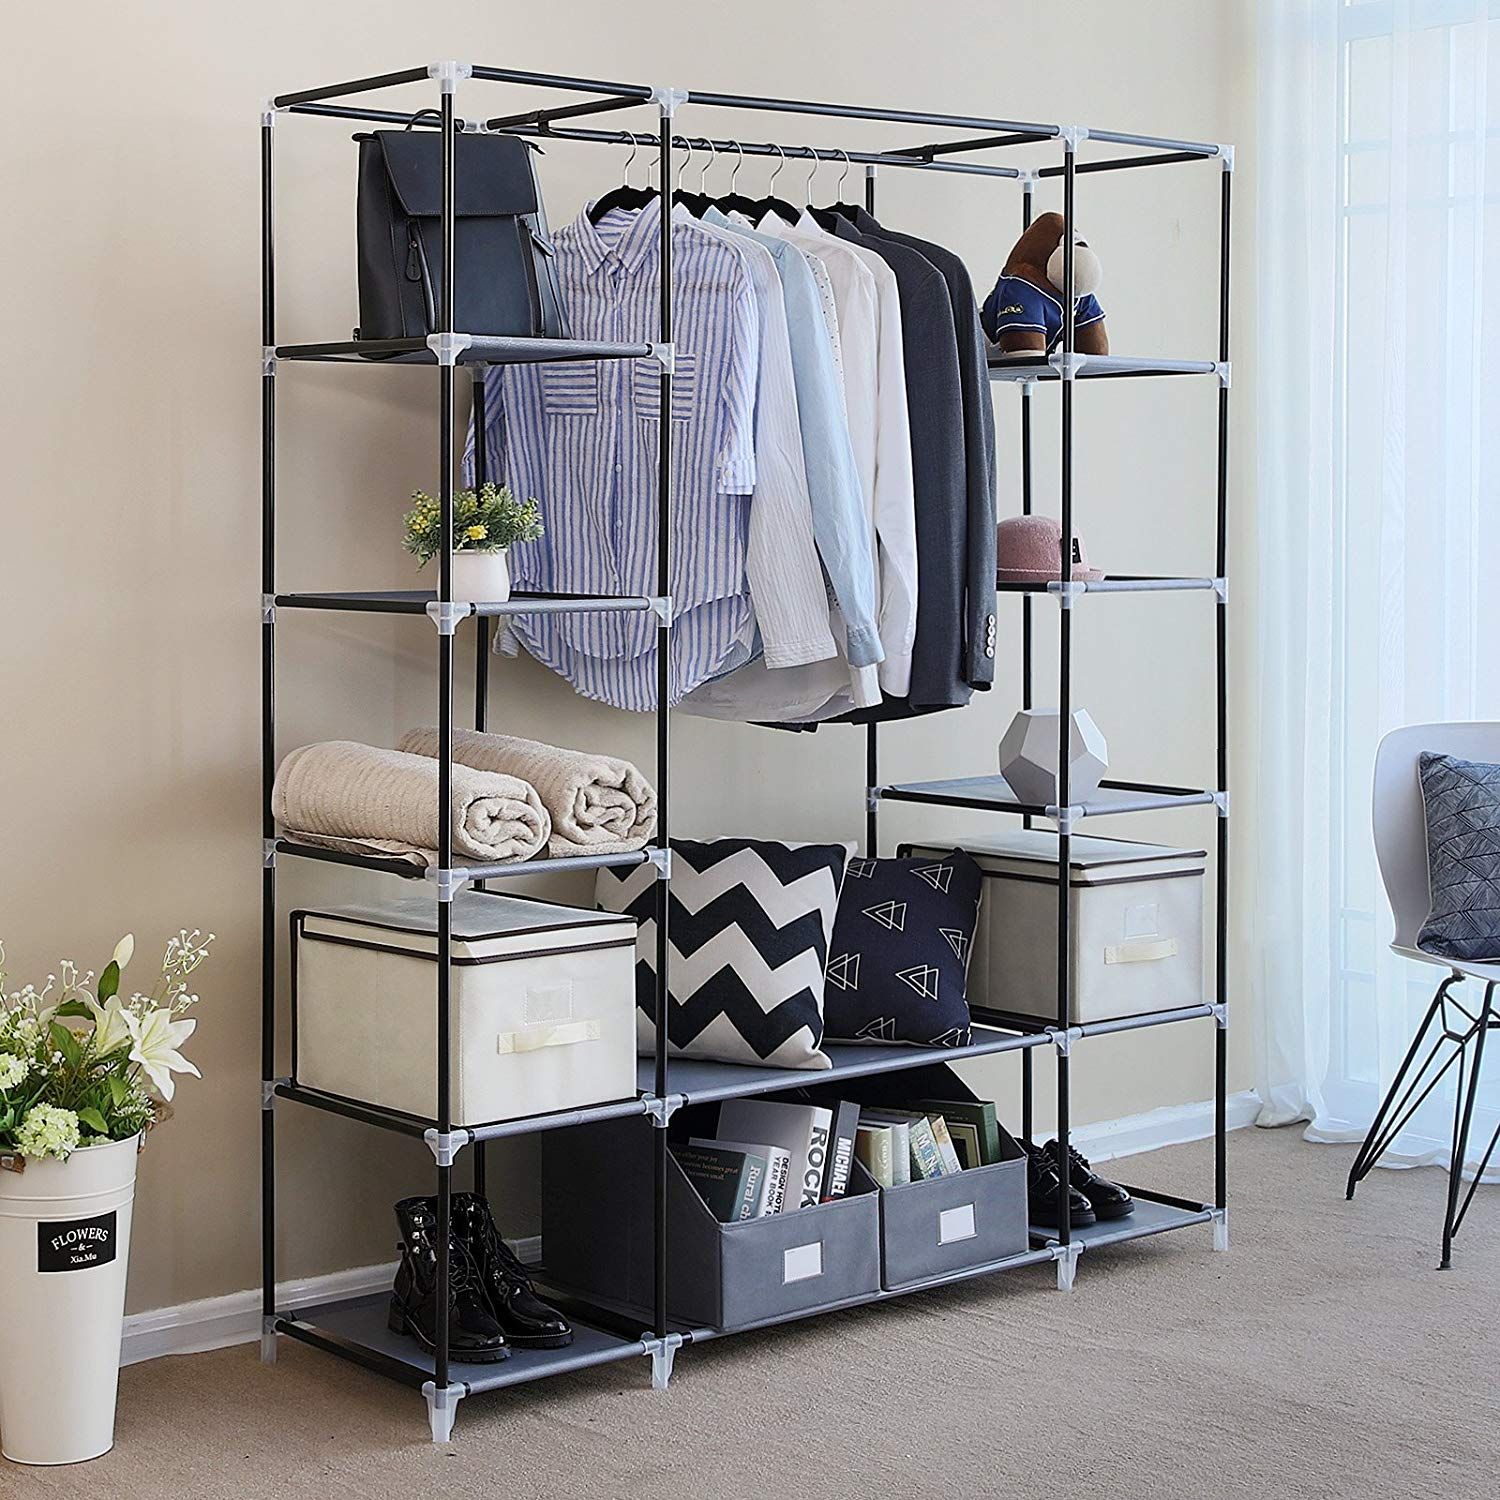 20 Portable Closet Choices For Easy Set Up And Cleaning | Storables With Regard To Extra Wide Portable Wardrobes (View 7 of 15)